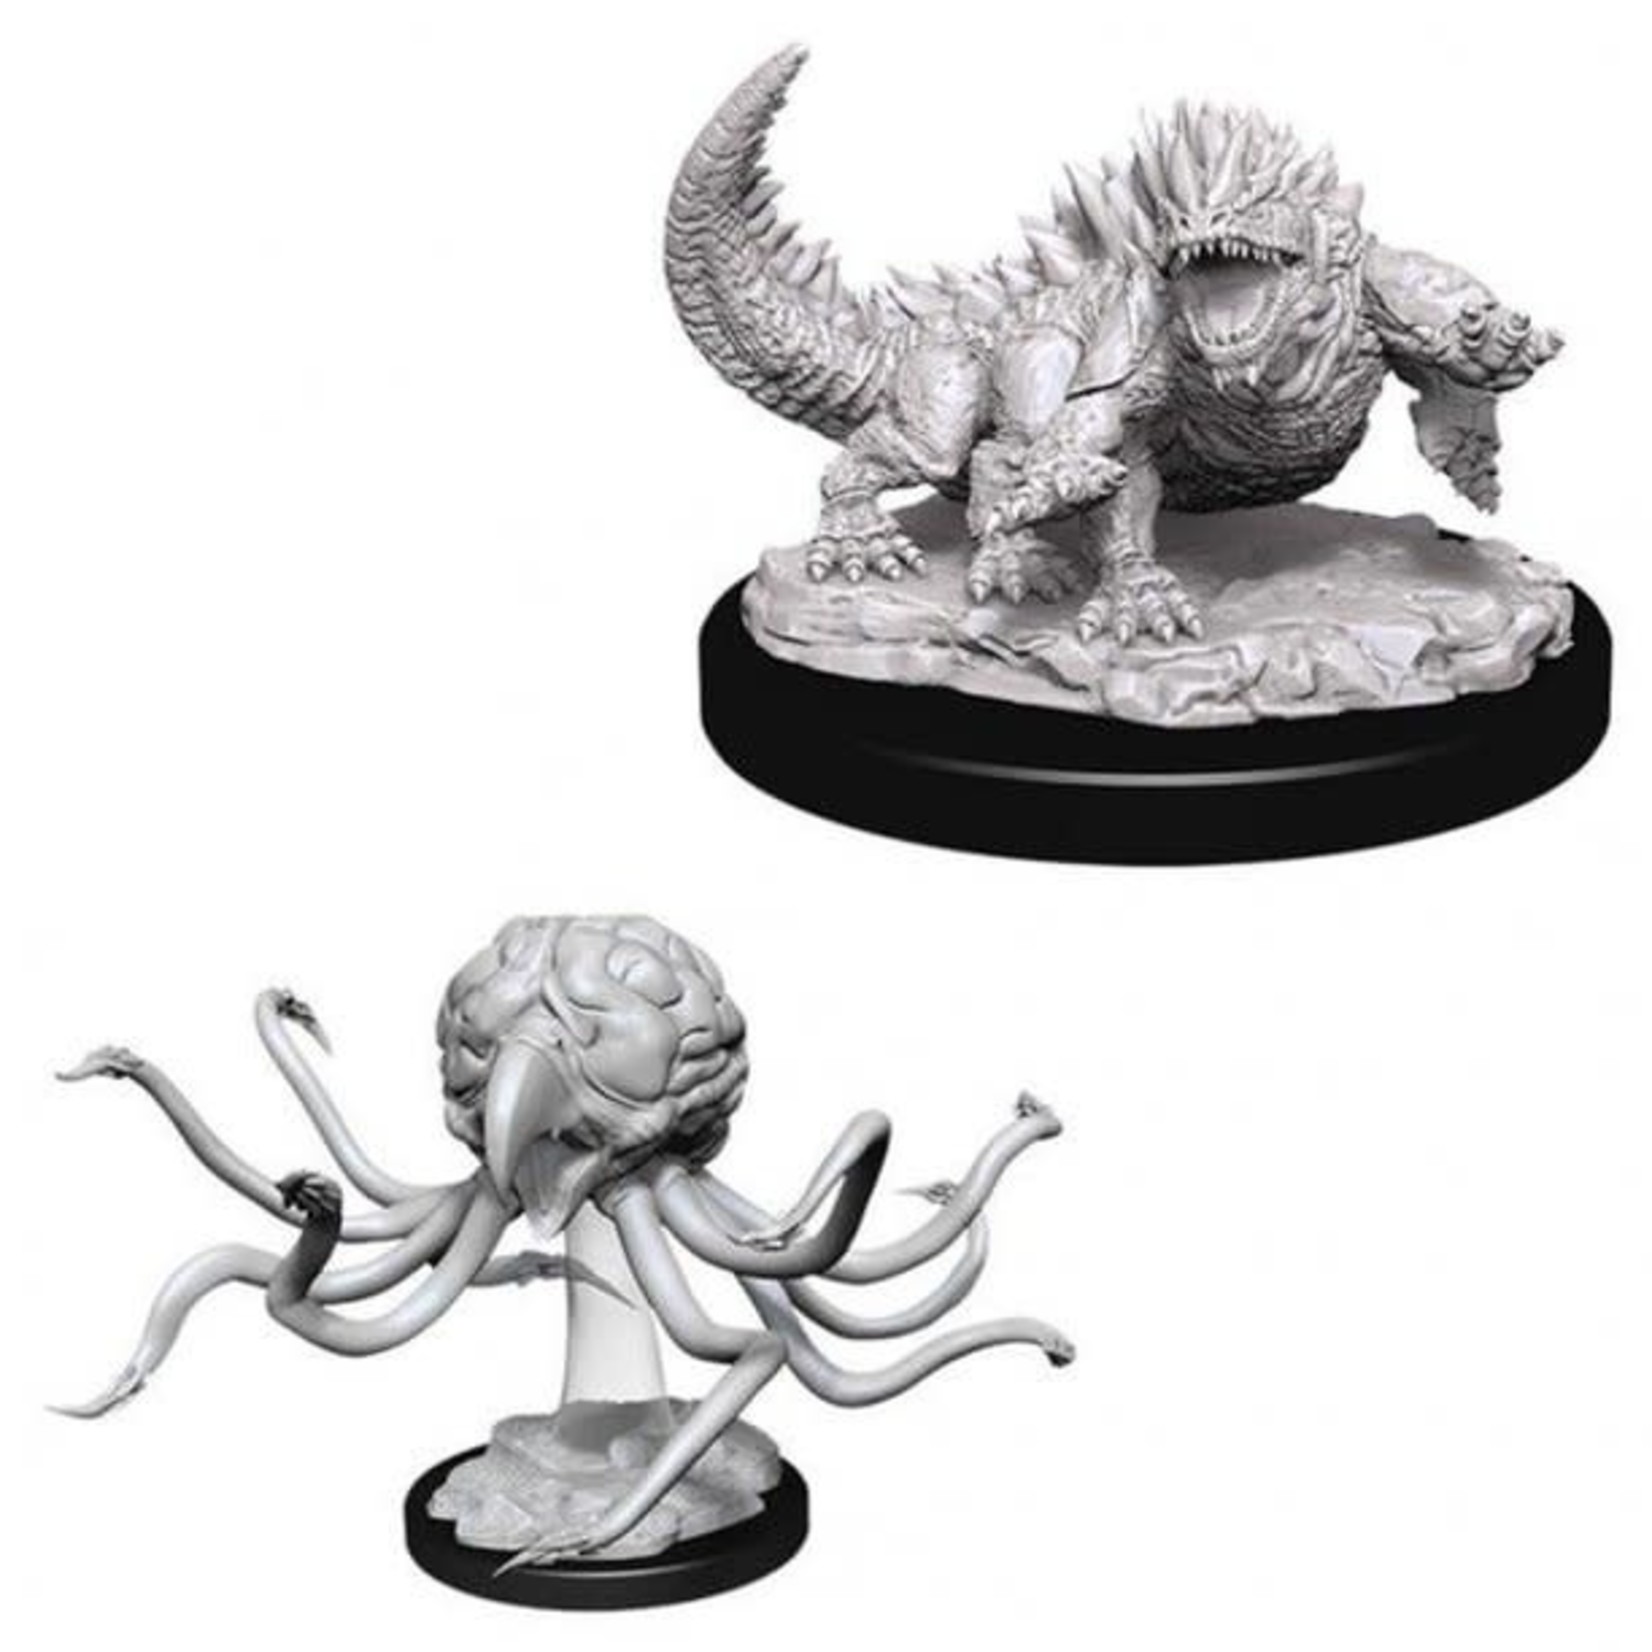 WizKids Dungeons and Dragons Nolzur's Marvelous Minis Basilisk and Grell